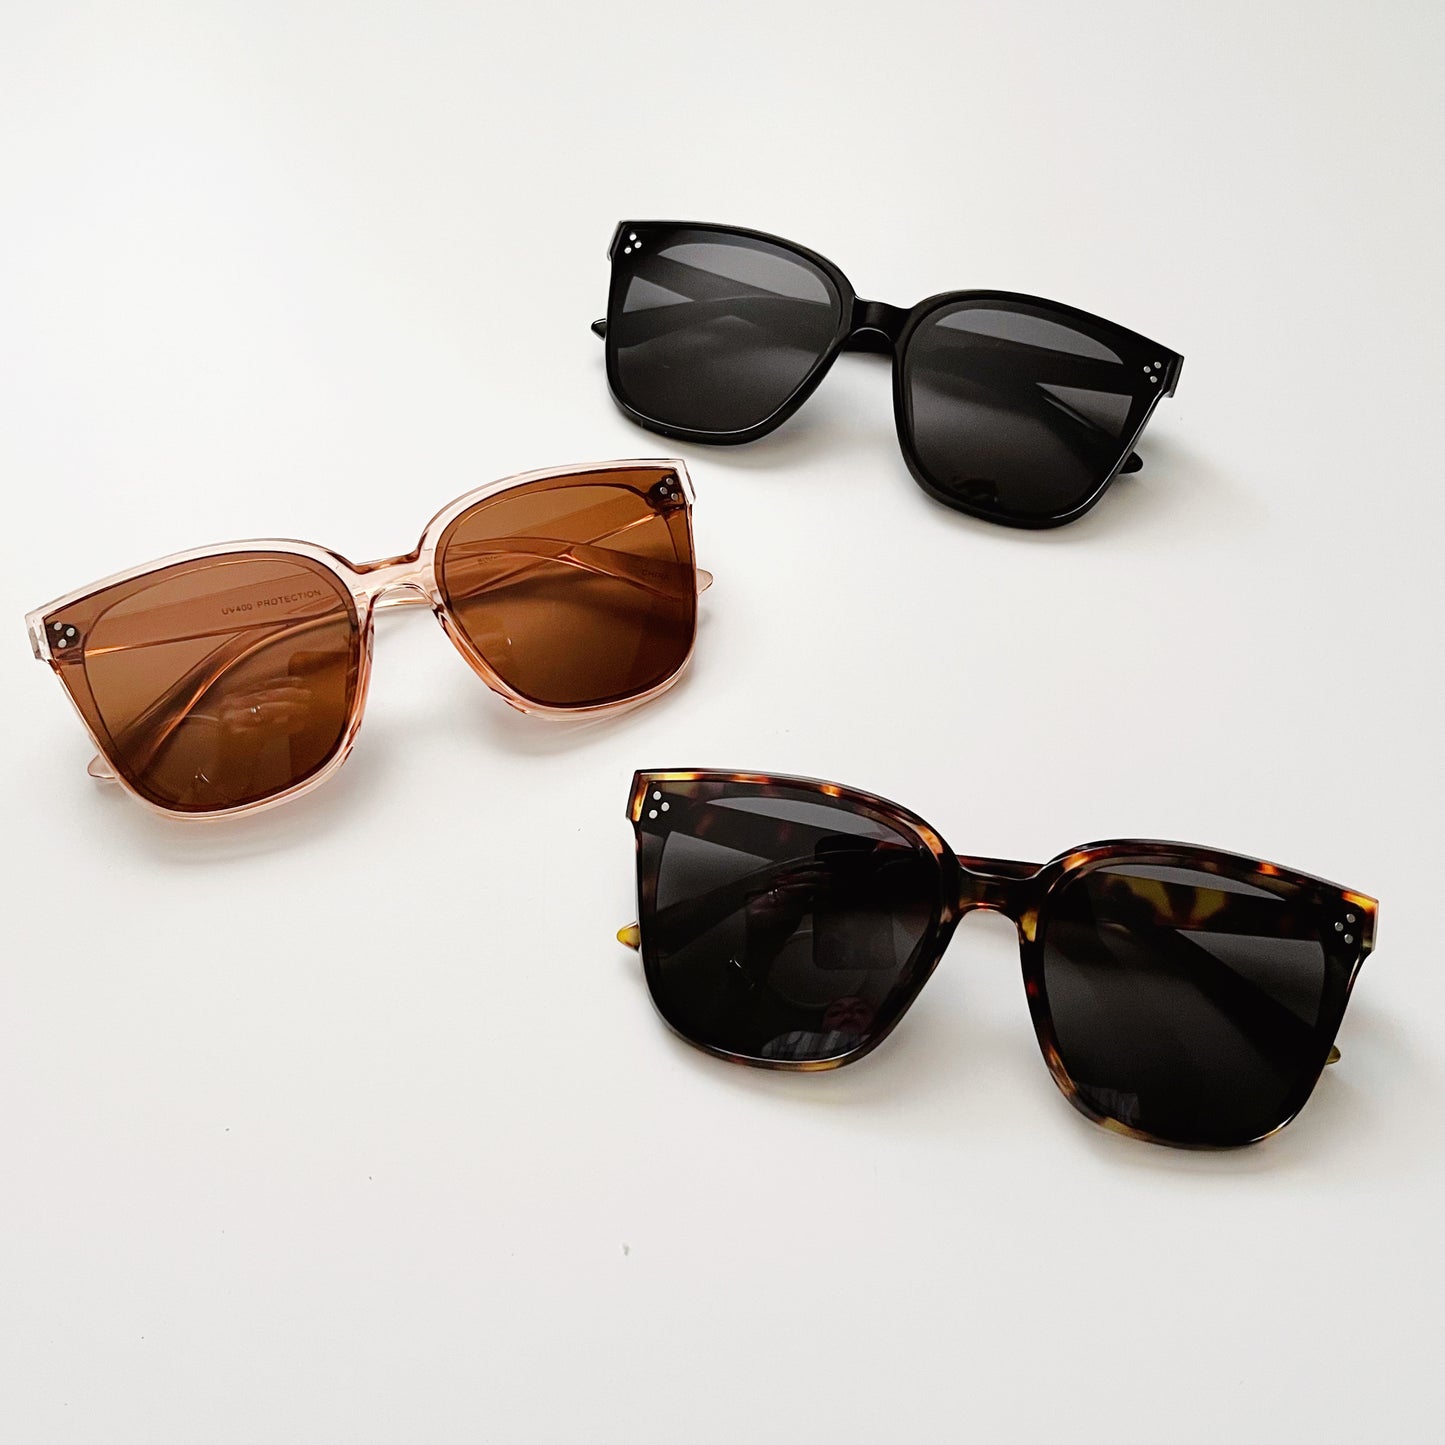 The Mikie Sunglasses